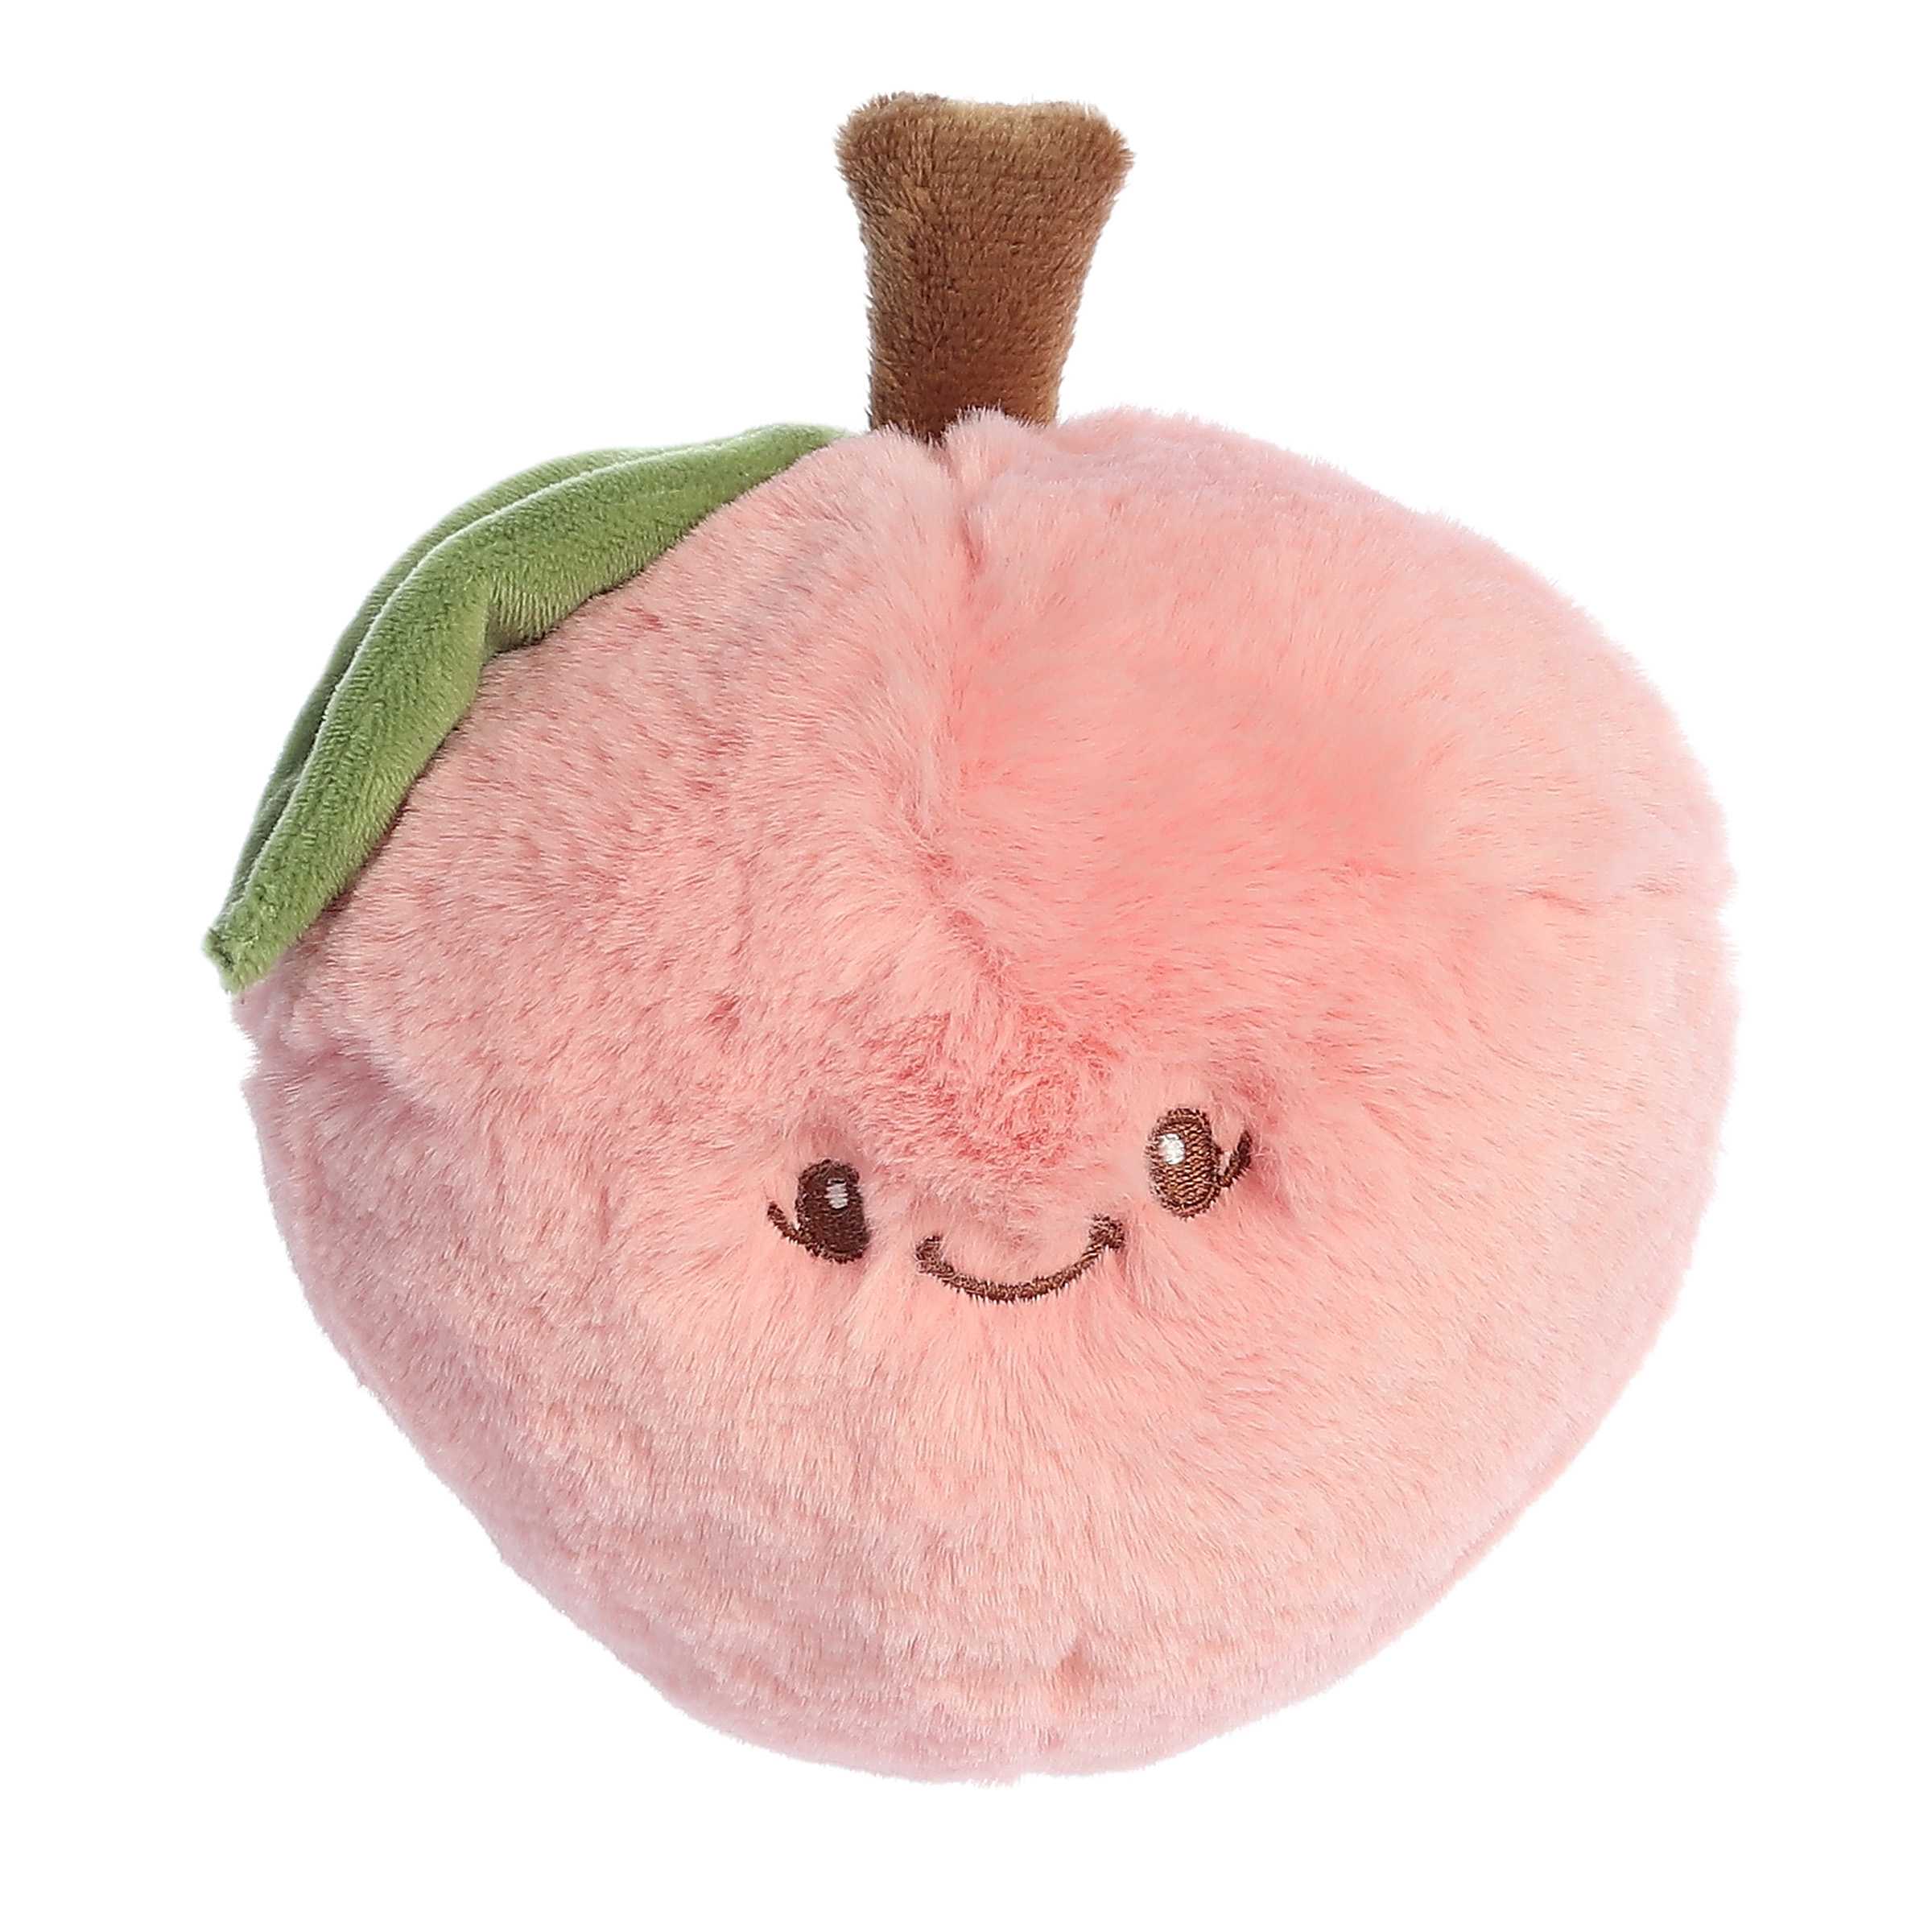 Adorable Peach Plush Toy with a pink round body, smiling face, and a dark brown stem and green leaf design at the top.